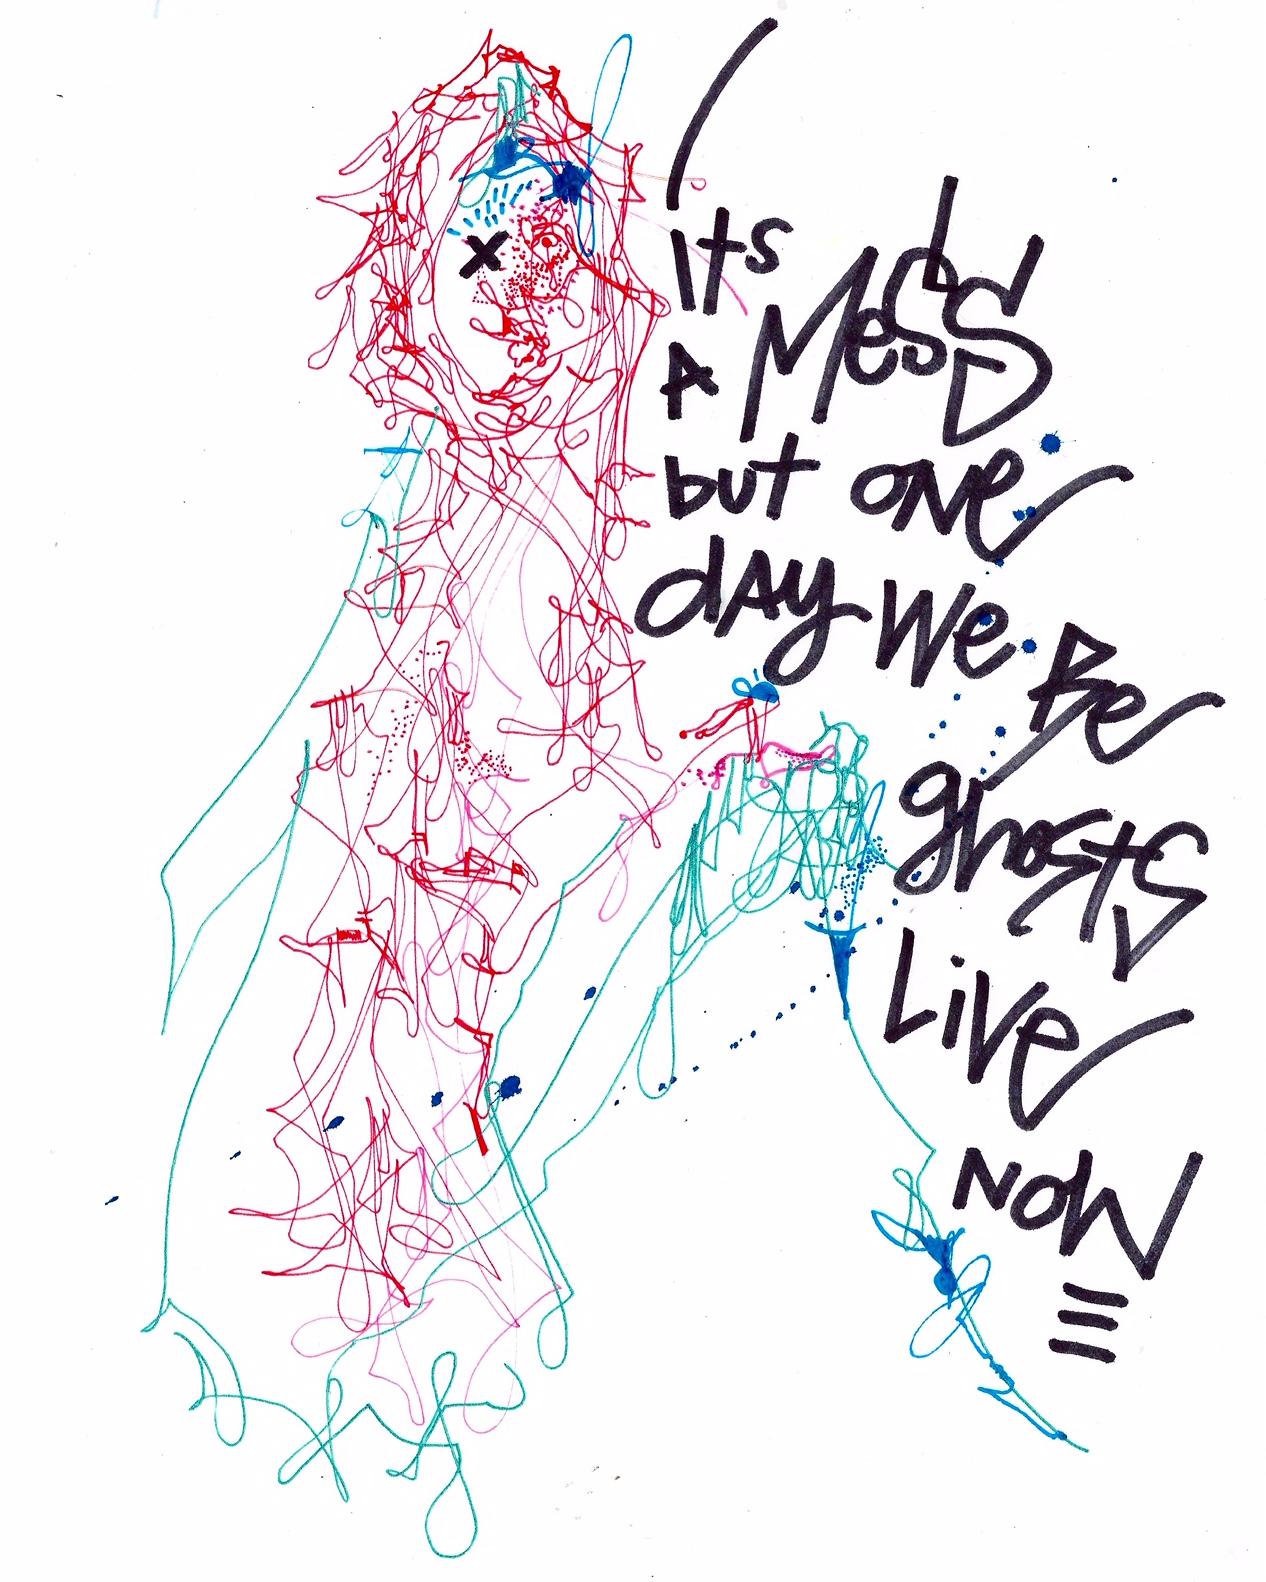 Michael Alan Abstract Drawing - American Contemporary Art by M. Alan -It’s a Mess but One Day W'll all be Ghosts